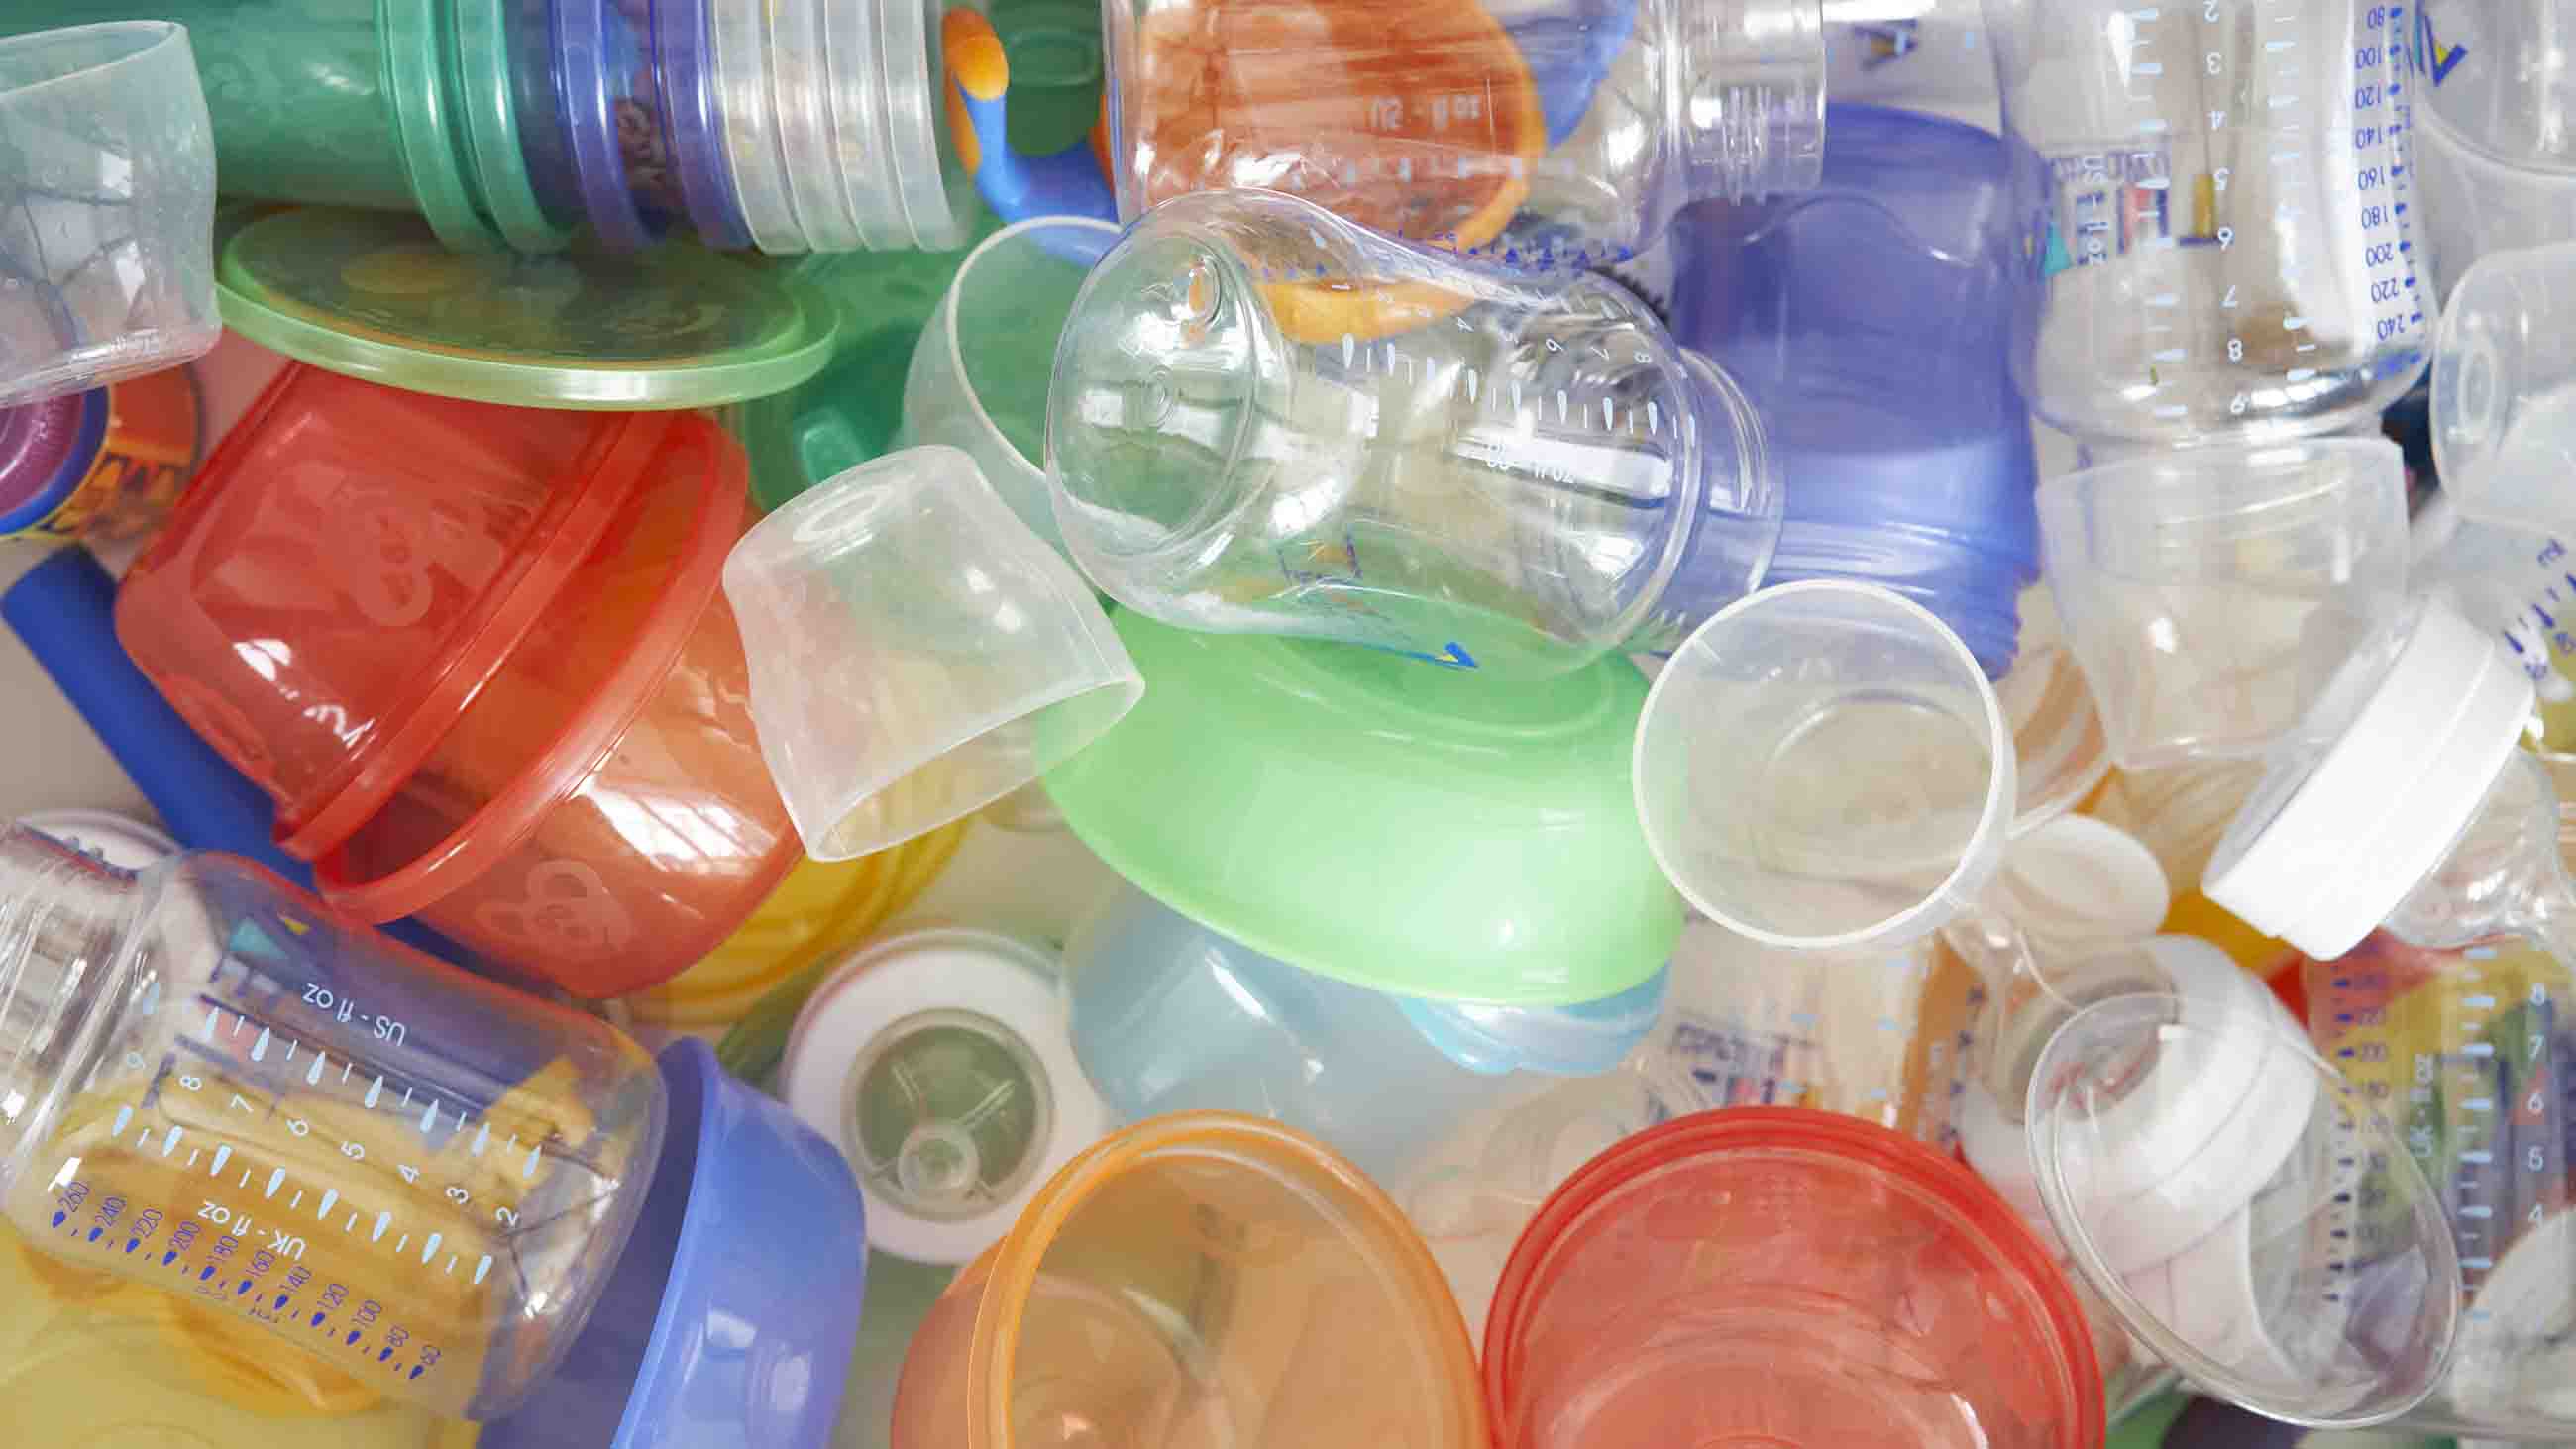 As manufacturers phase out BPA, are the alternative any better?